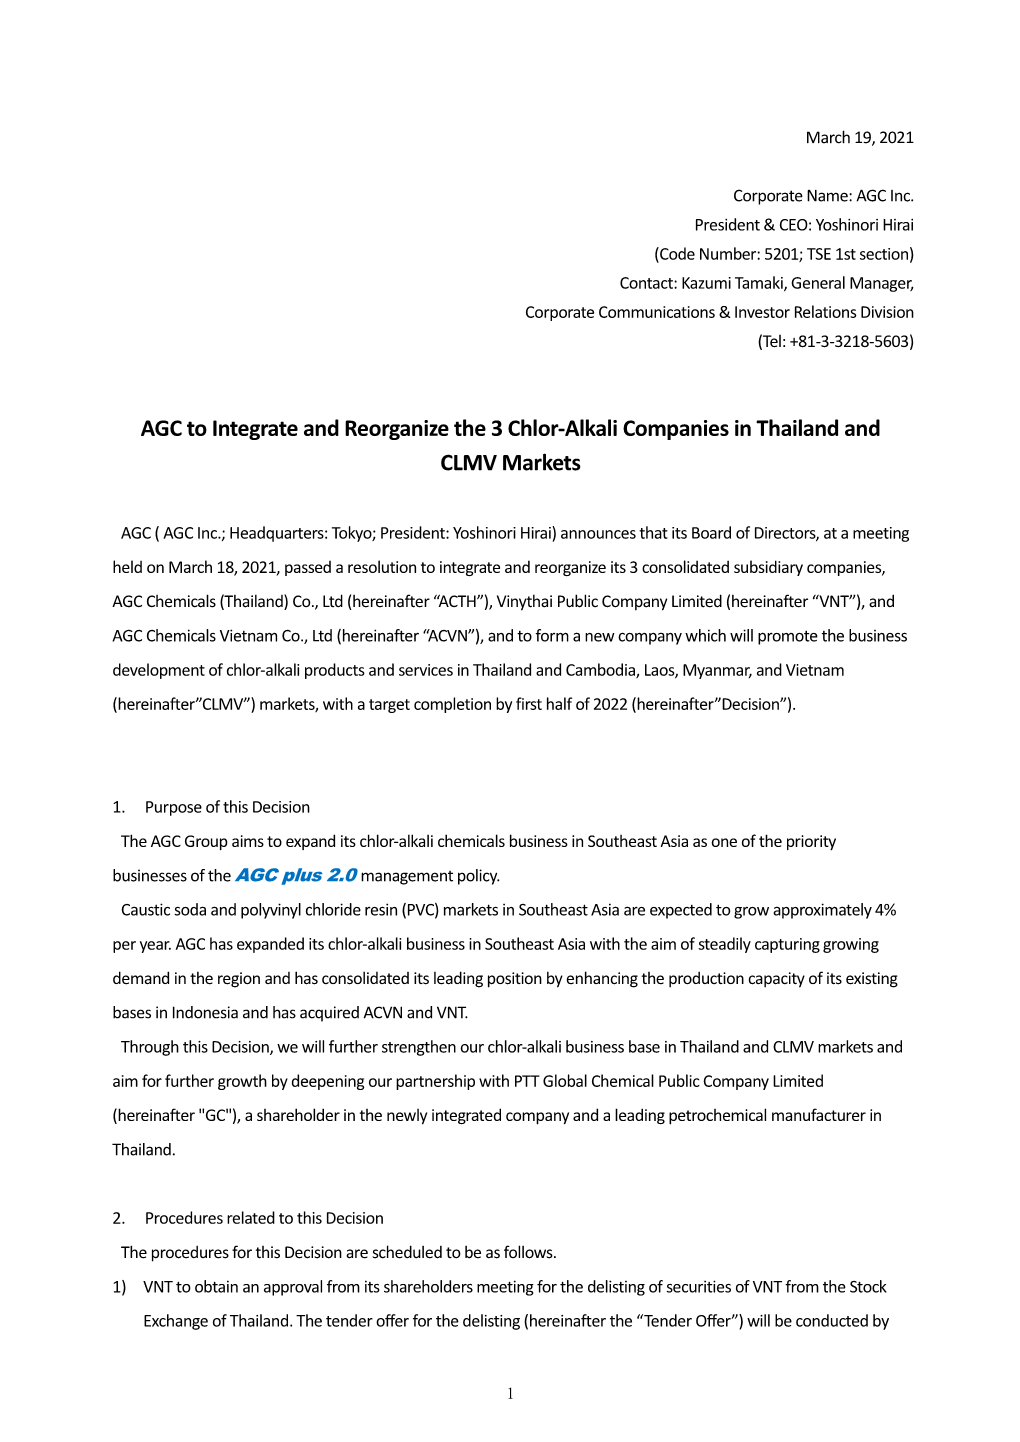 AGC to Integrate and Reorganize the 3 Chlor-Alkali Companies in Thailand and CLMV Markets